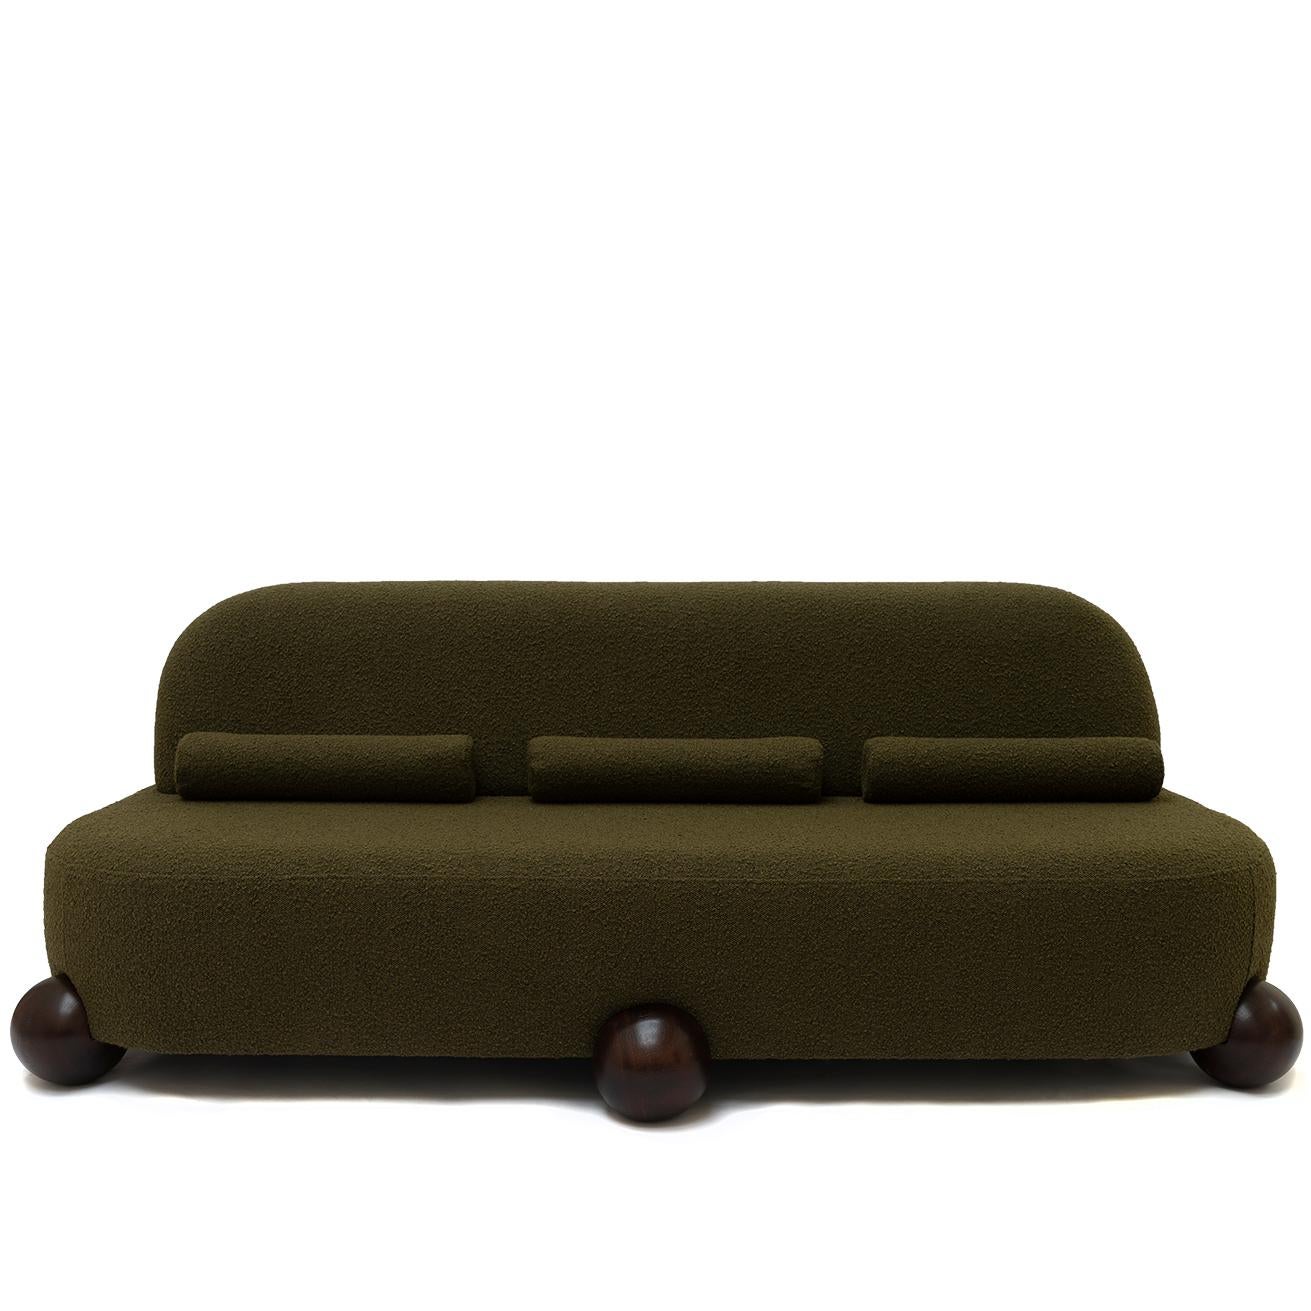 Object 075 Sofa by NG Design
Dimensions: W 228 x D 107 x H 78 cm
Materials: Bouclé Fabric, Oak

Also Available: All of objects available in different materials and colors on demand.

The Object 075 Sofa is an elegant eccentricity in your dream